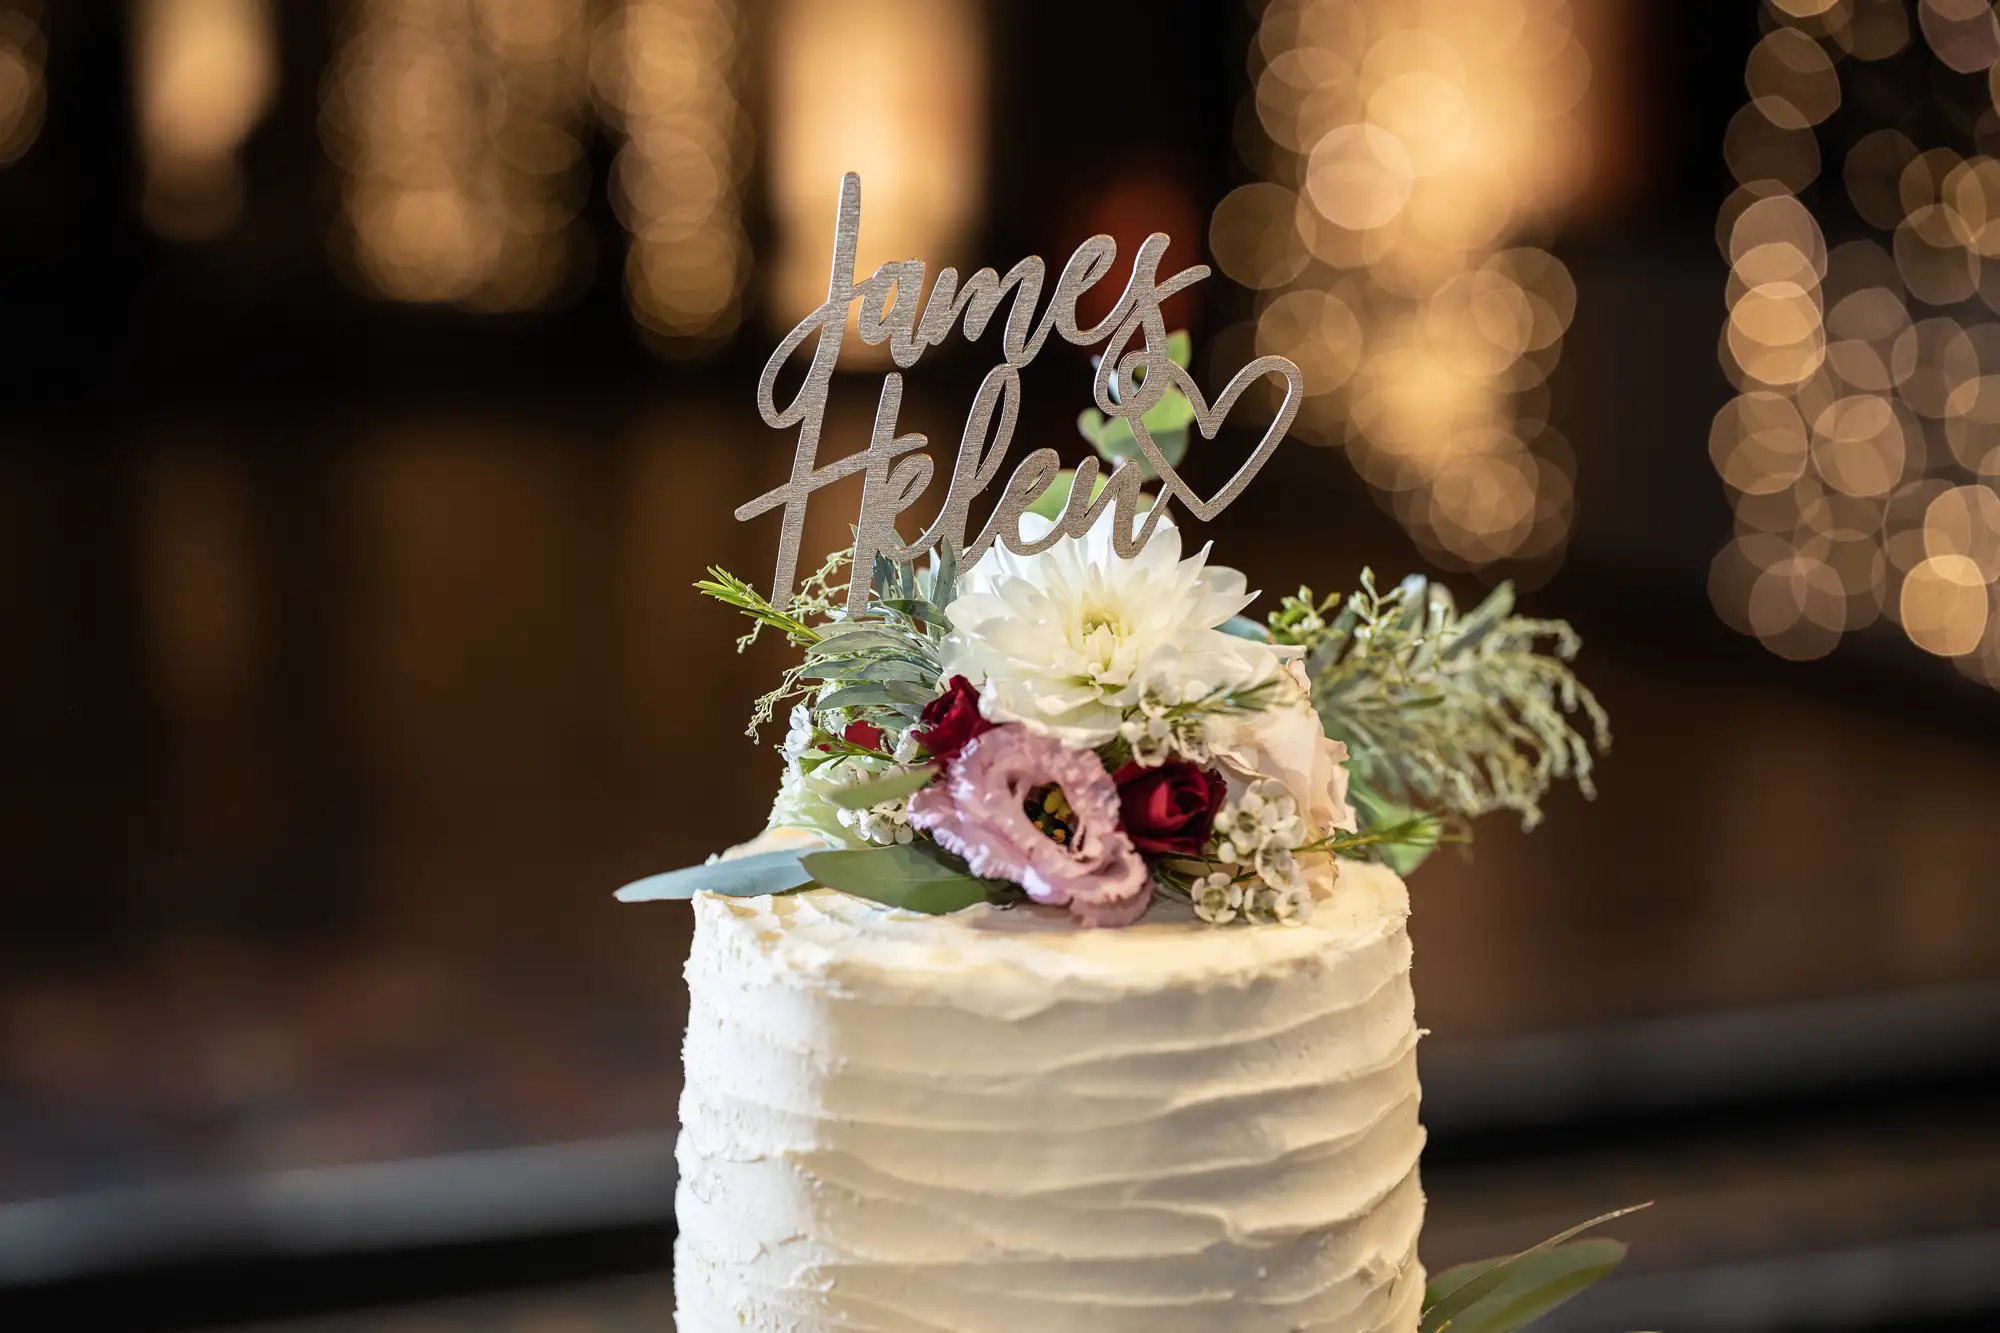 A wedding cake adorned with a "just married" topper and a mix of white and red flowers, set against a softly blurred background of golden lights.